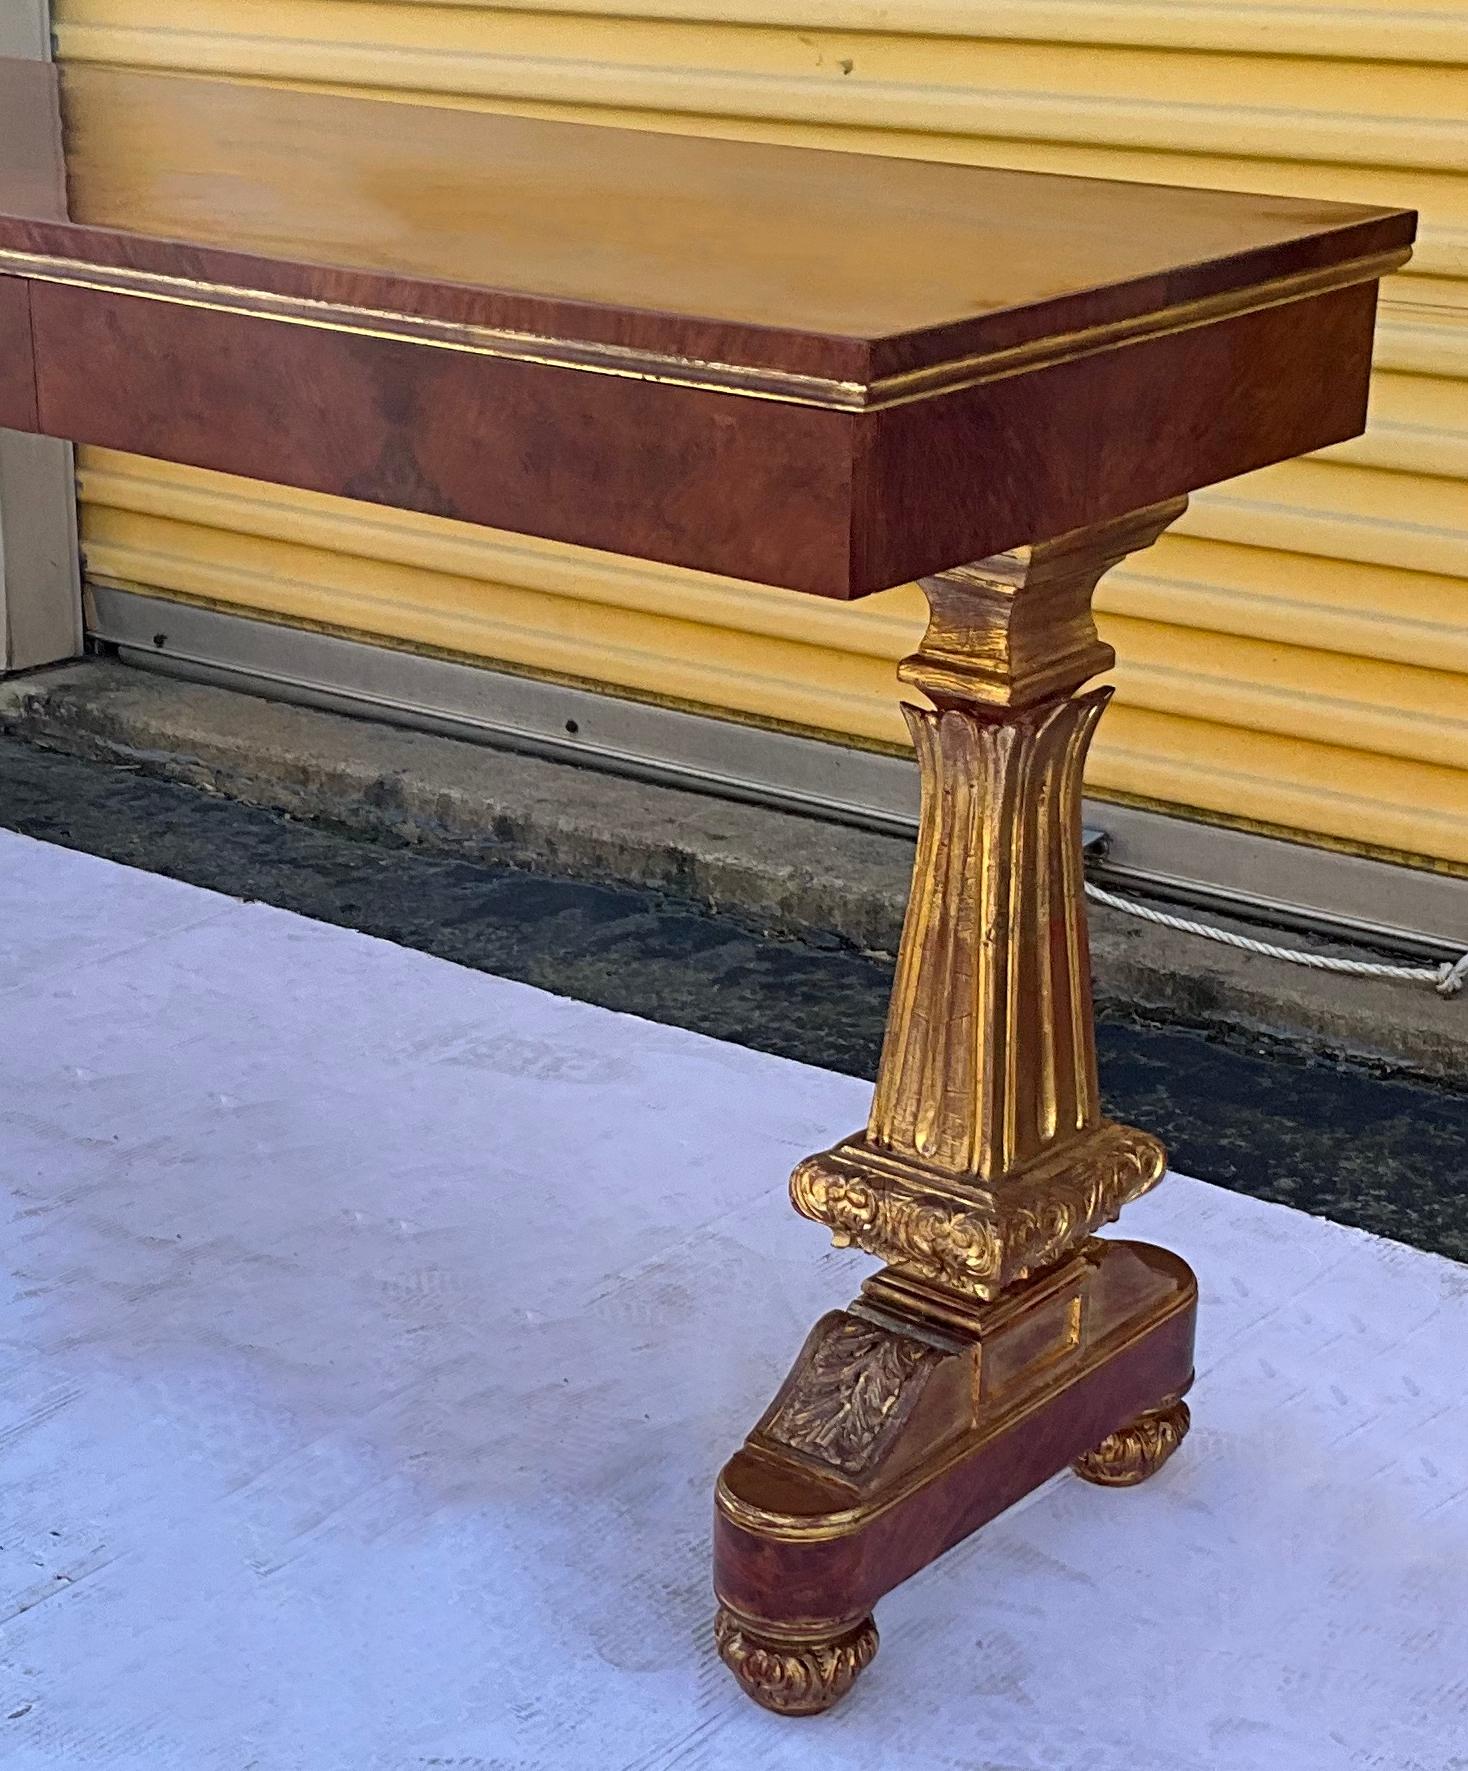 20th Century 20th-C. Italian Burlwood and Giltwood Neo-Classical Style Console Table / Desk